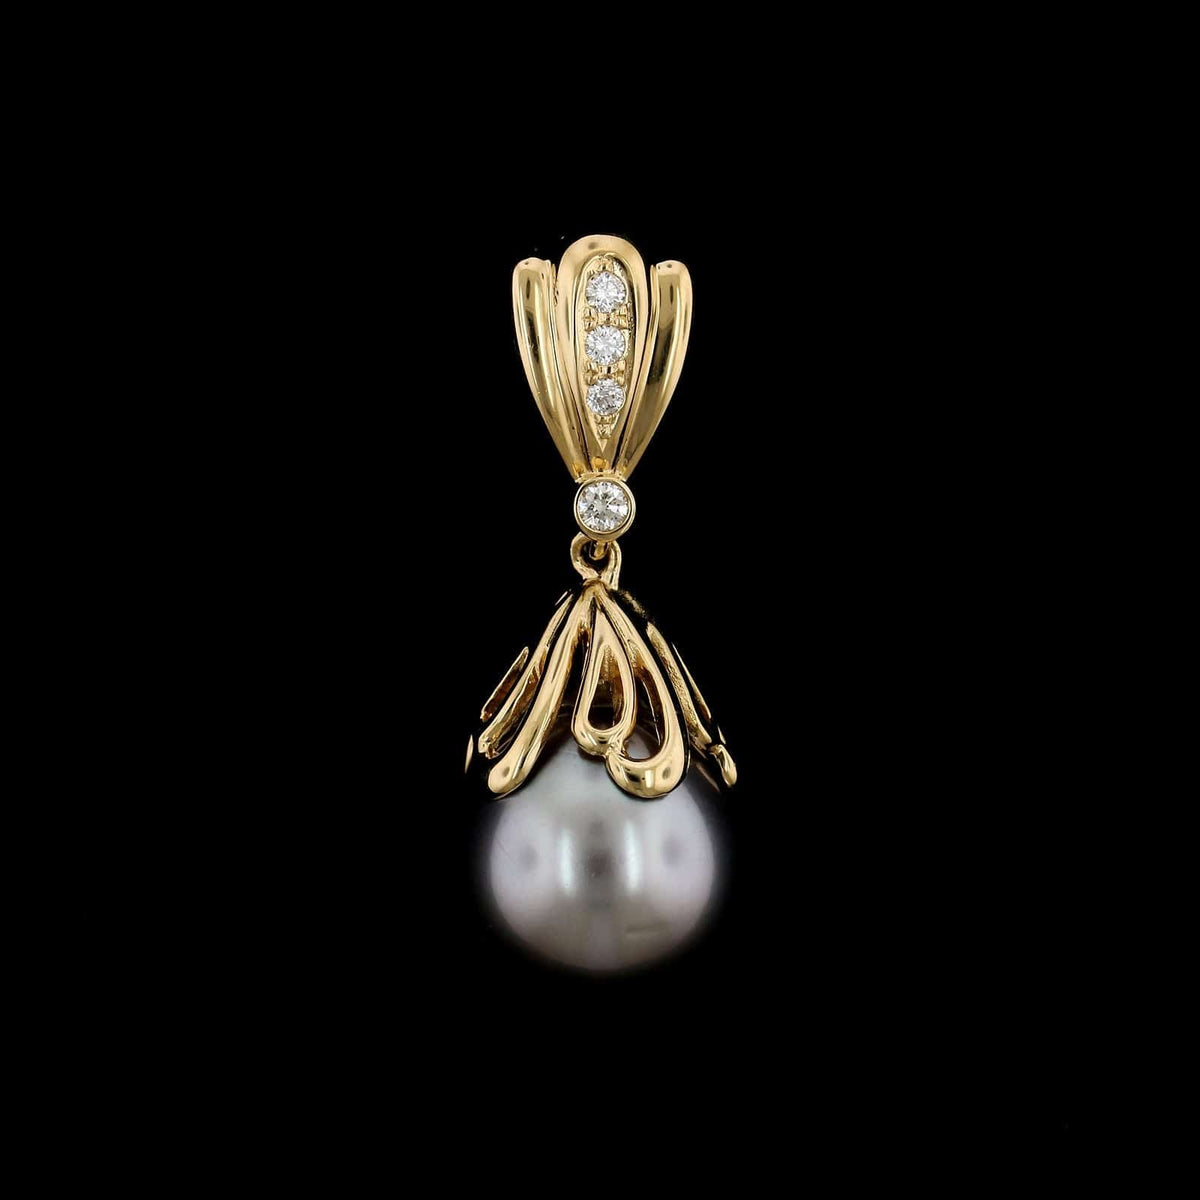 18K Yellow Gold Estate Cultured Black South Sea Pearl and Diamond Pendant Enhancer, 14k yellow gold, Long's Jewelers